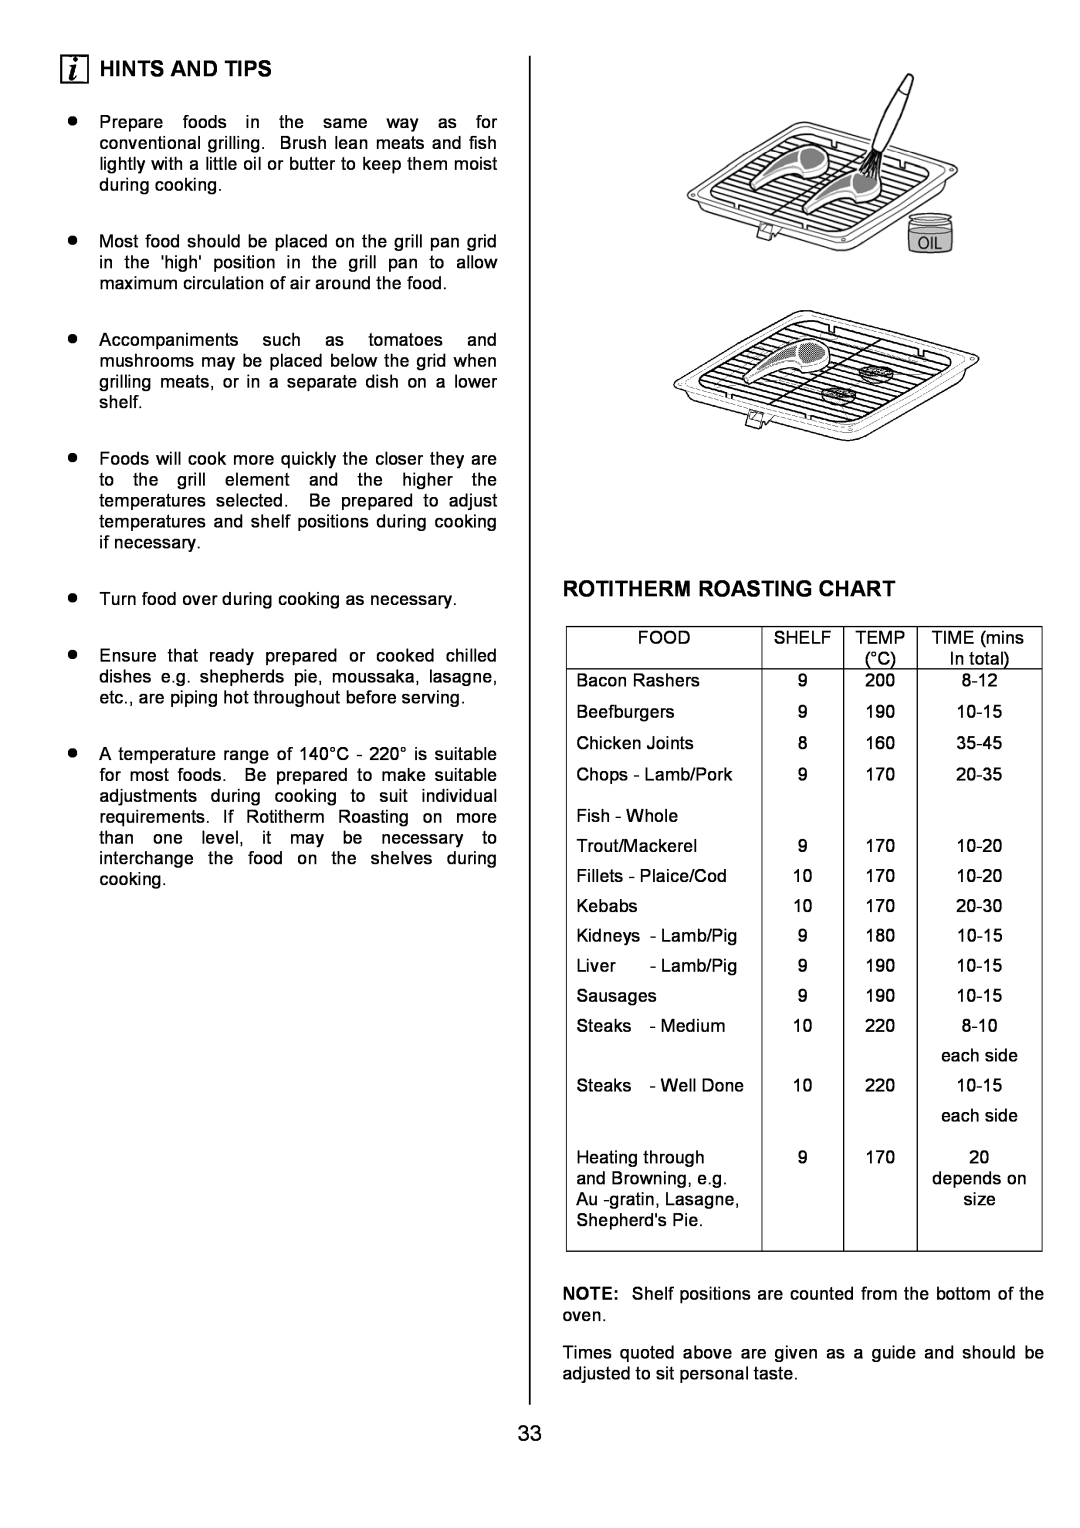 Electrolux U7101-4 operating instructions Hints And Tips, Rotitherm Roasting Chart, size 